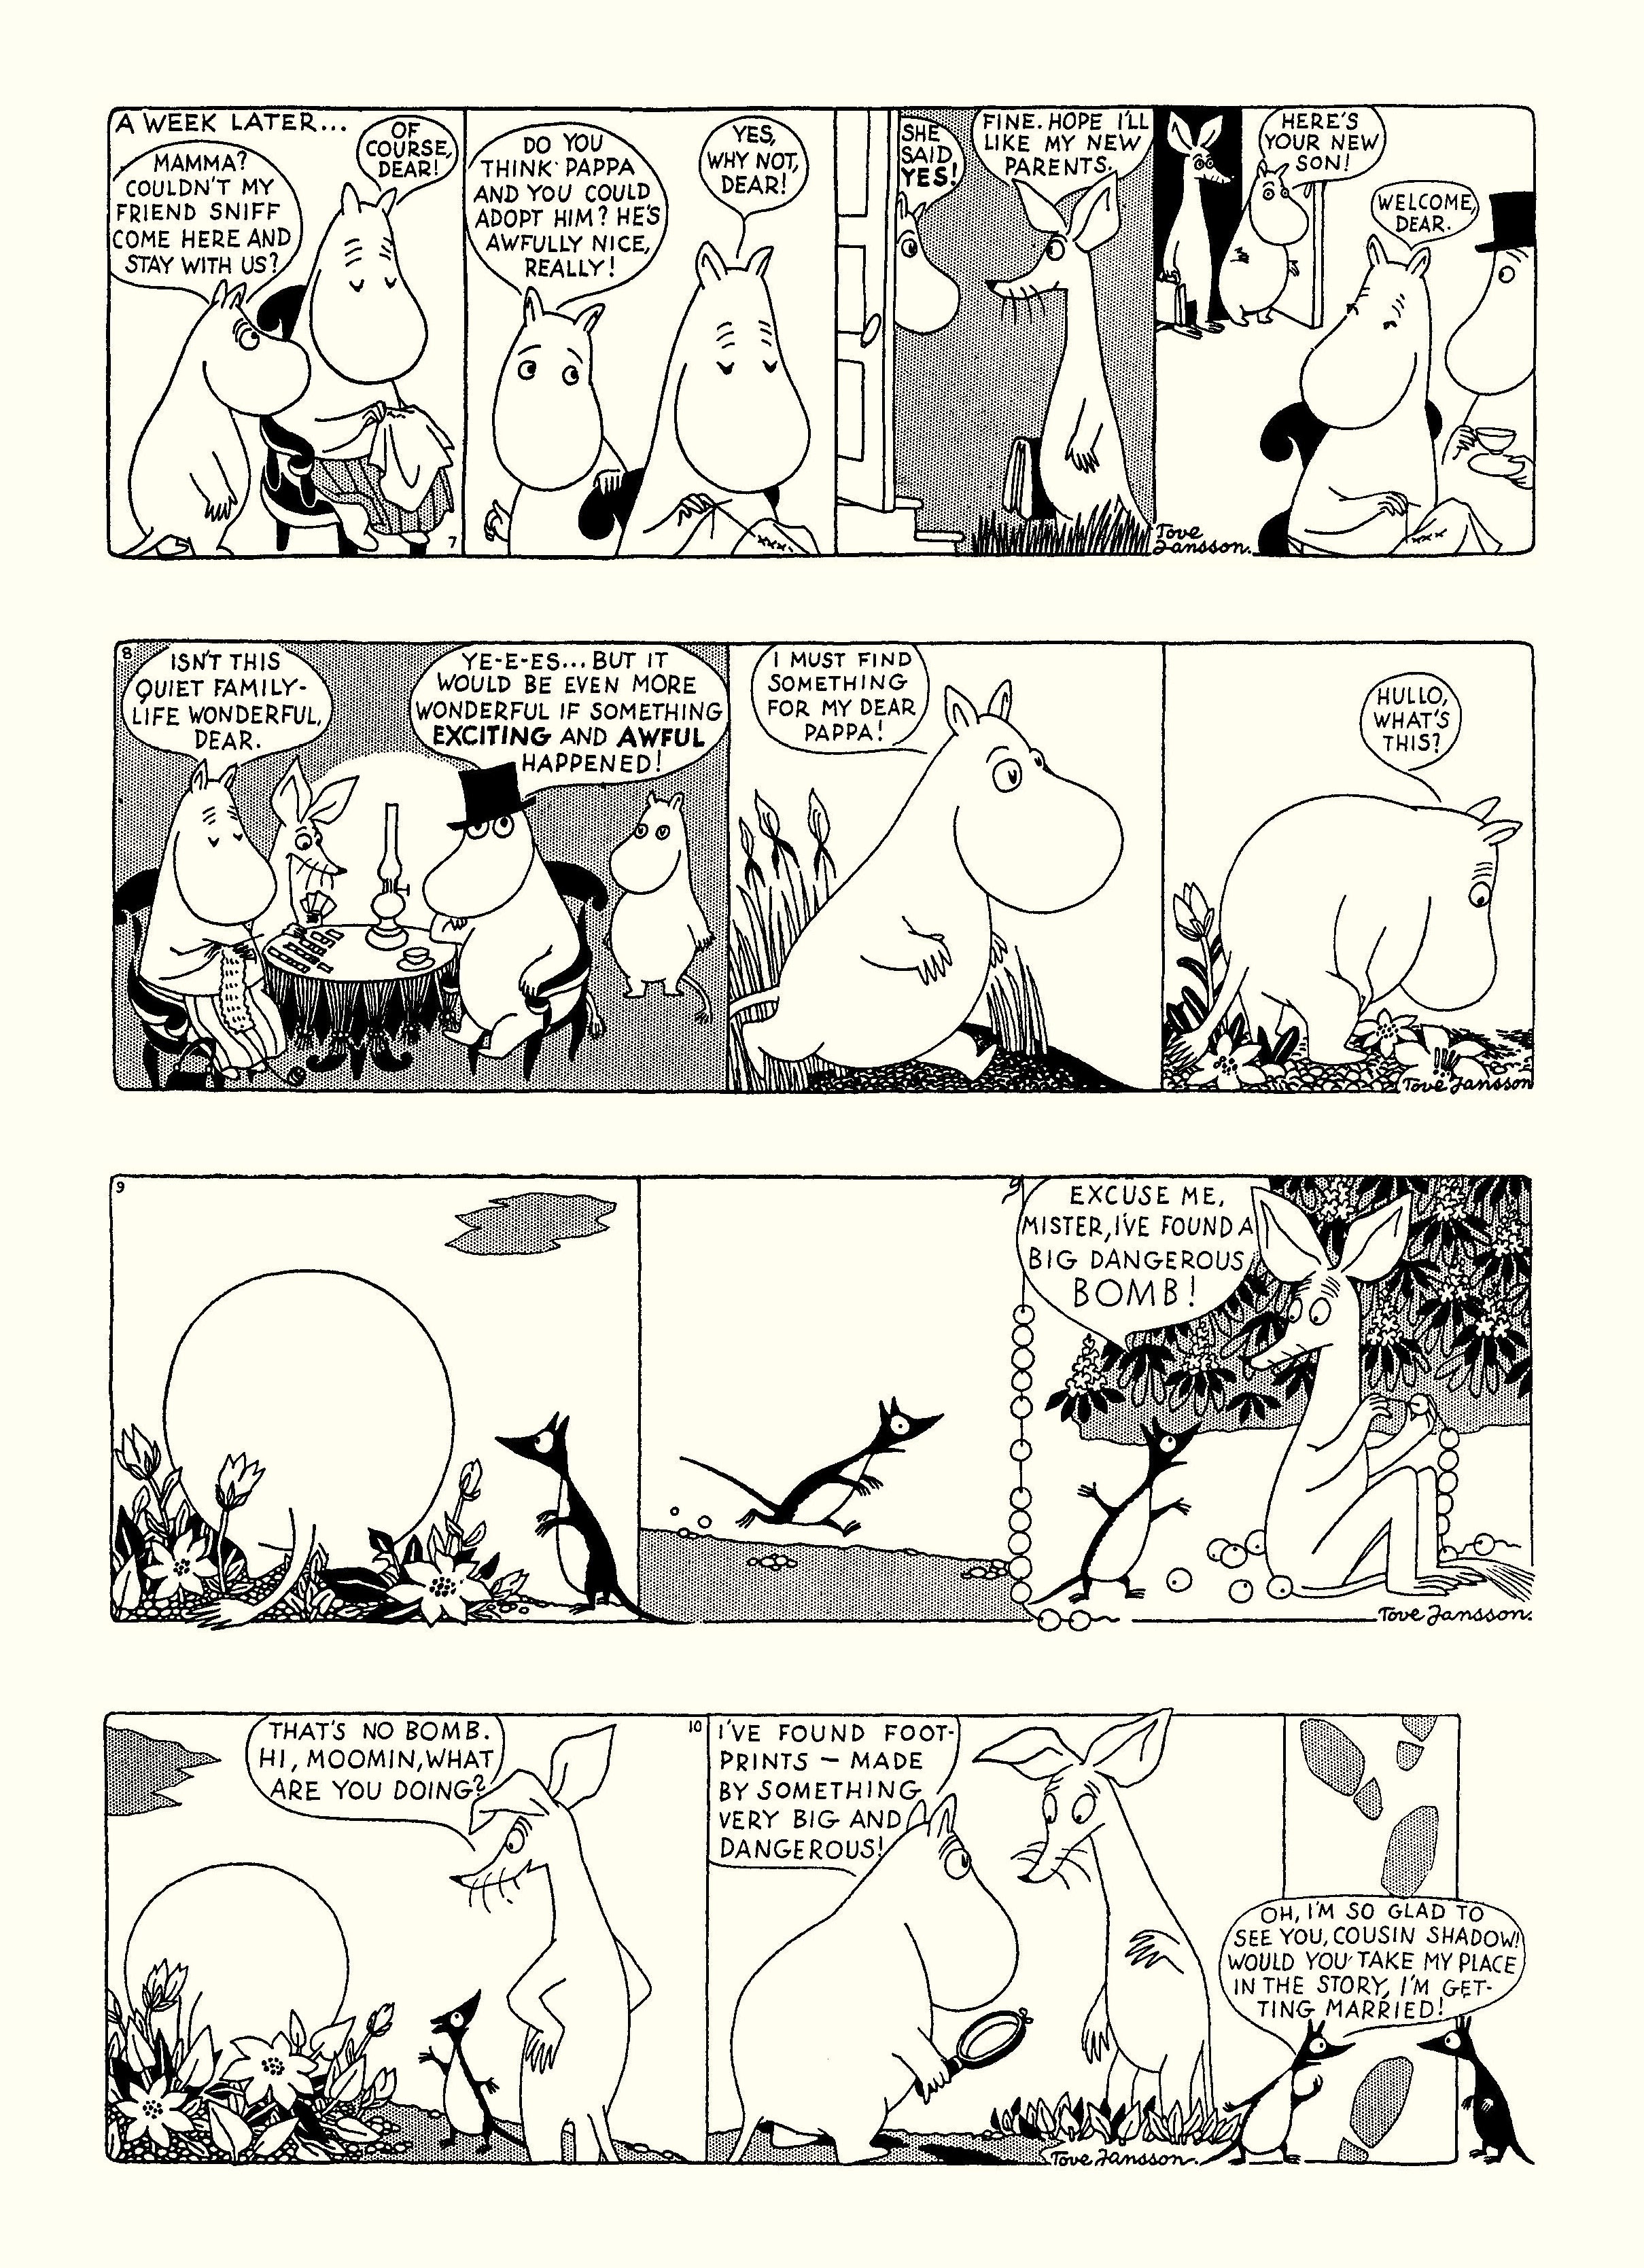 Read online Moomin: The Complete Tove Jansson Comic Strip comic -  Issue # TPB 1 - 32